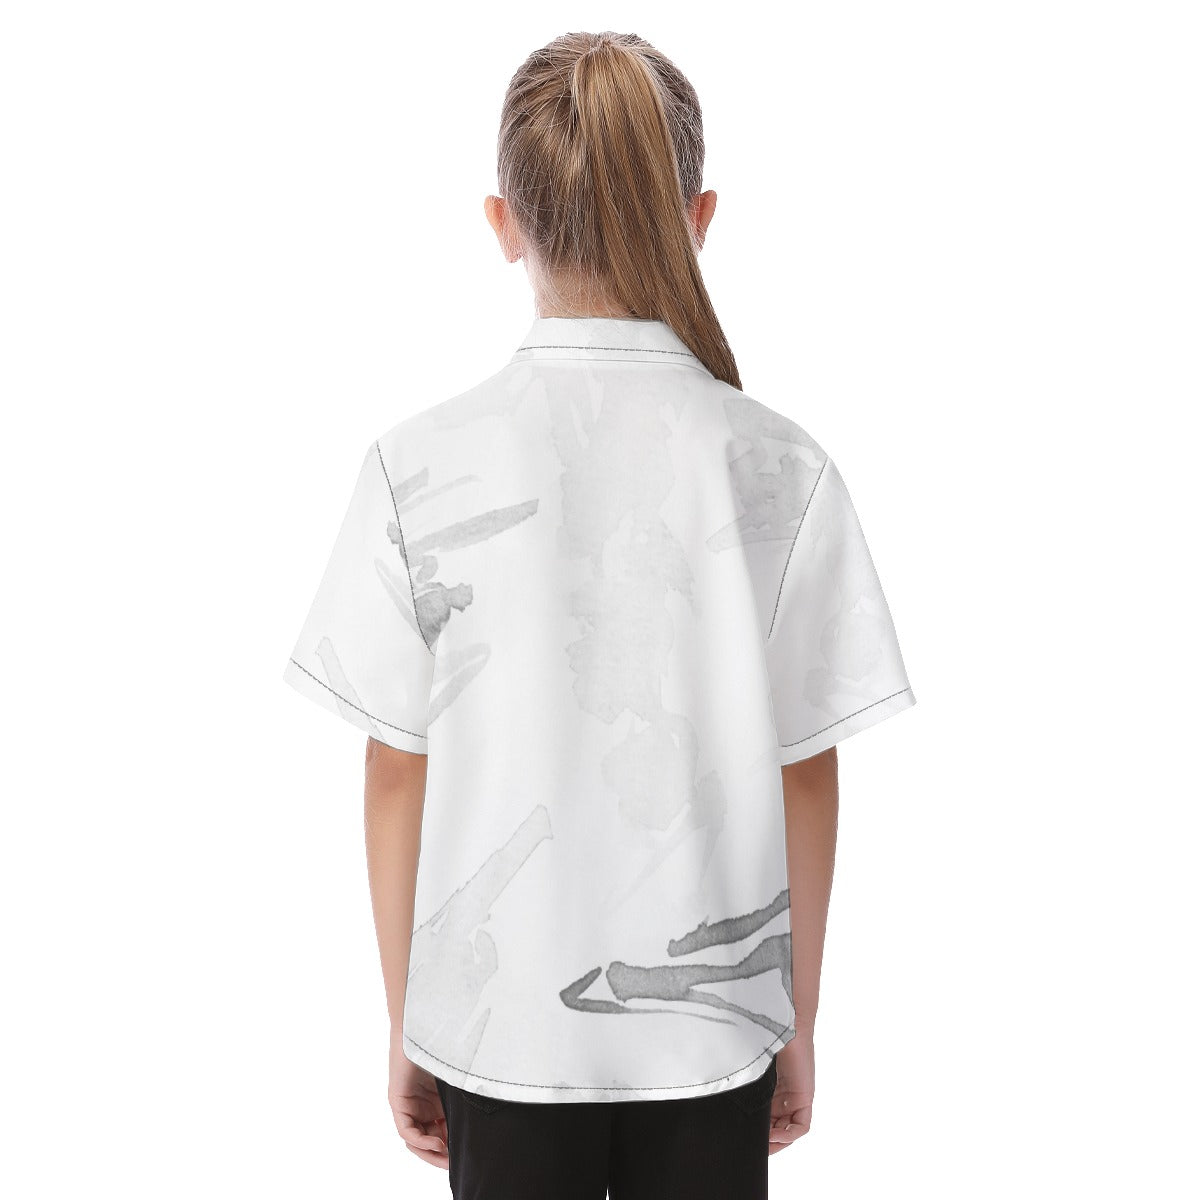 Youth All Over Print Vacation Shirt